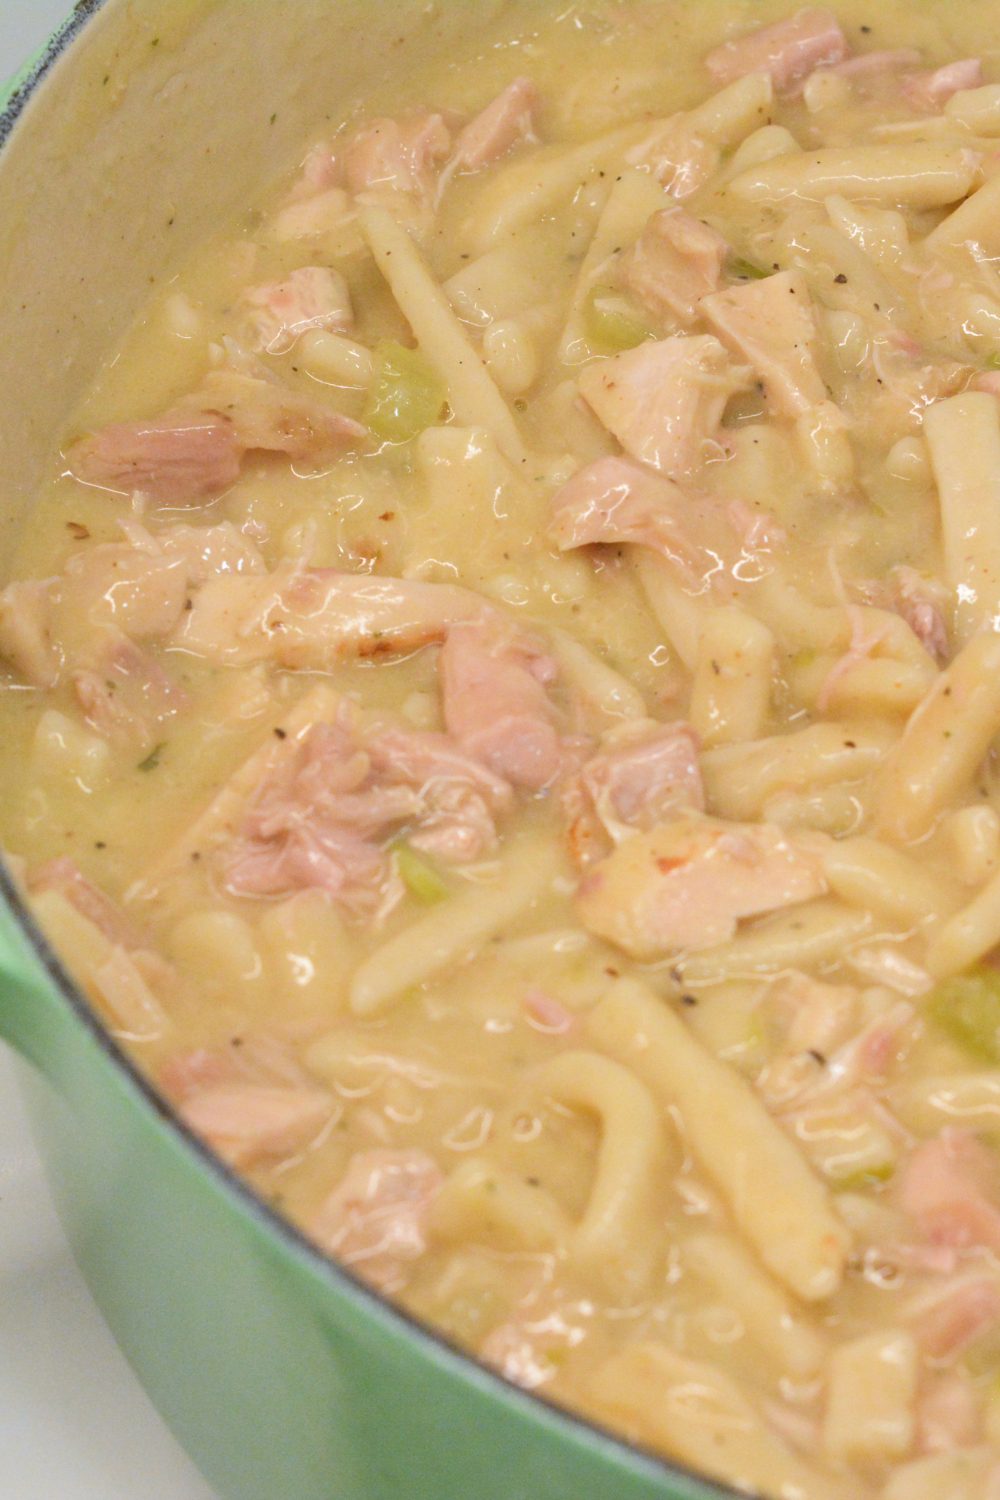 Turkey and Noodles made with leftover turkey is easily made on the stove by sauteing onoins, celery, and garlic together before adding the turkey, broth, and Reames wide noodles.